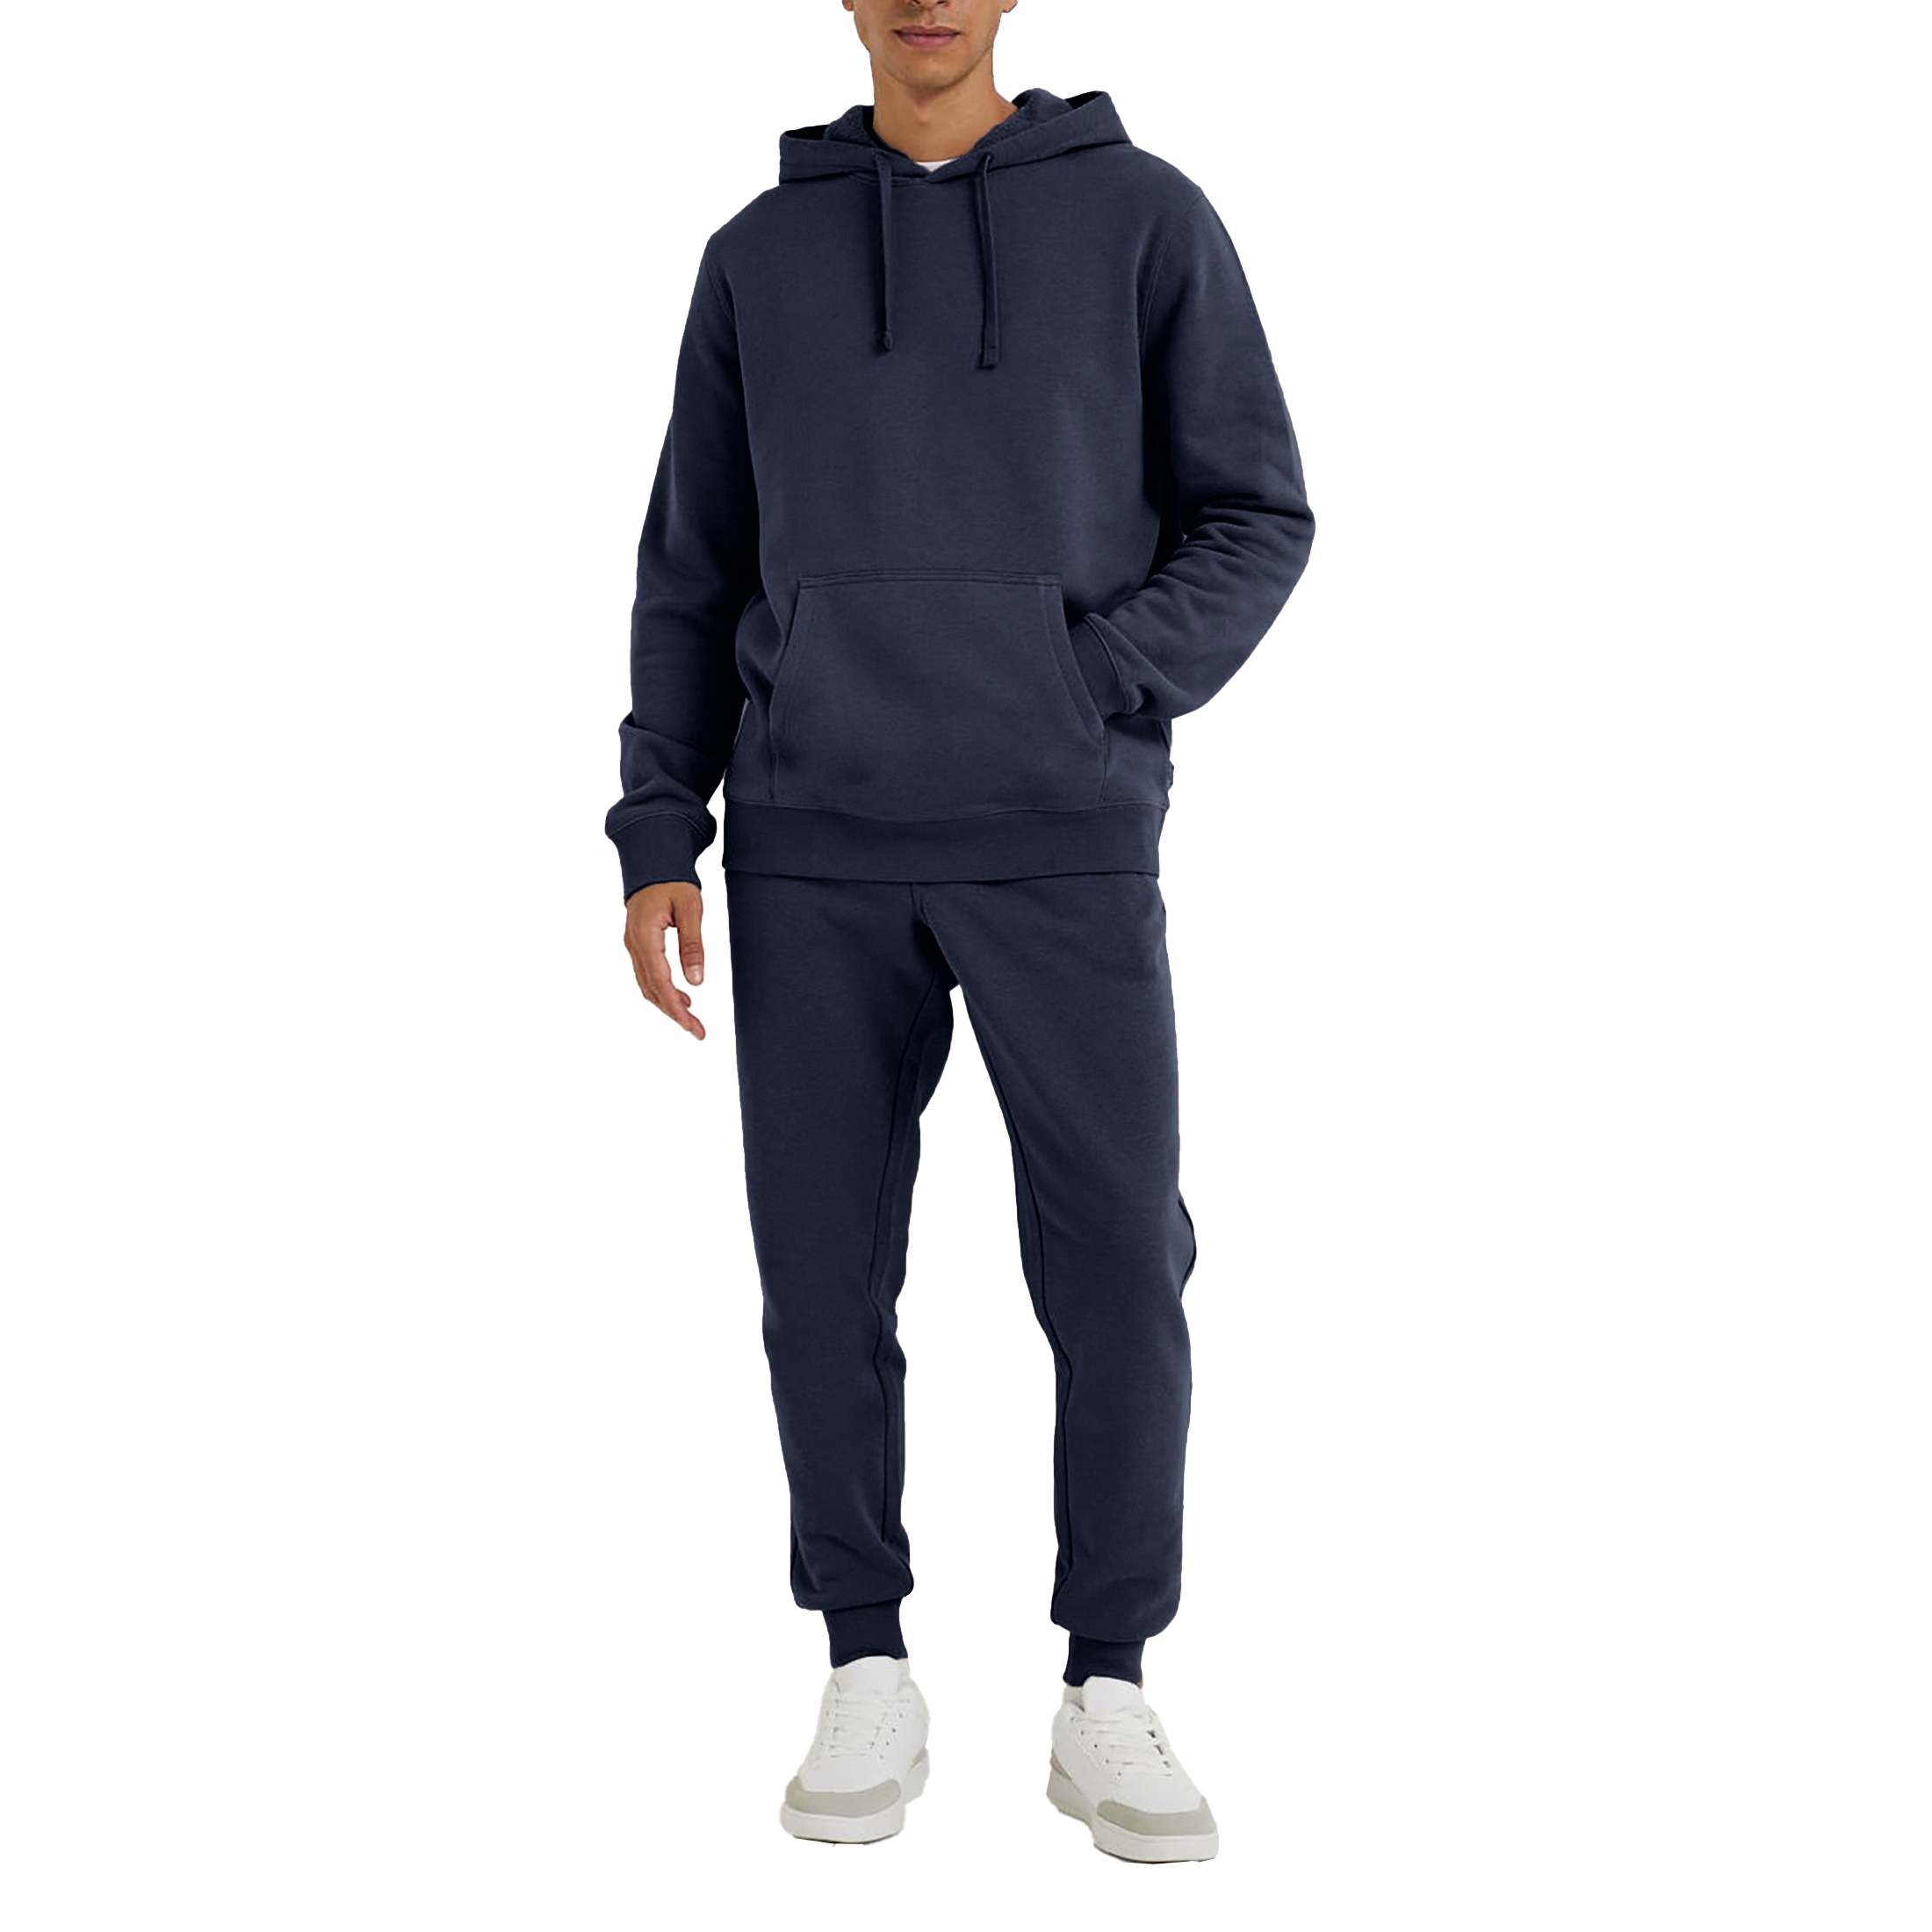 Men's Athletic Warm Jogging Pullover Active Tracksuit - Navy, Small